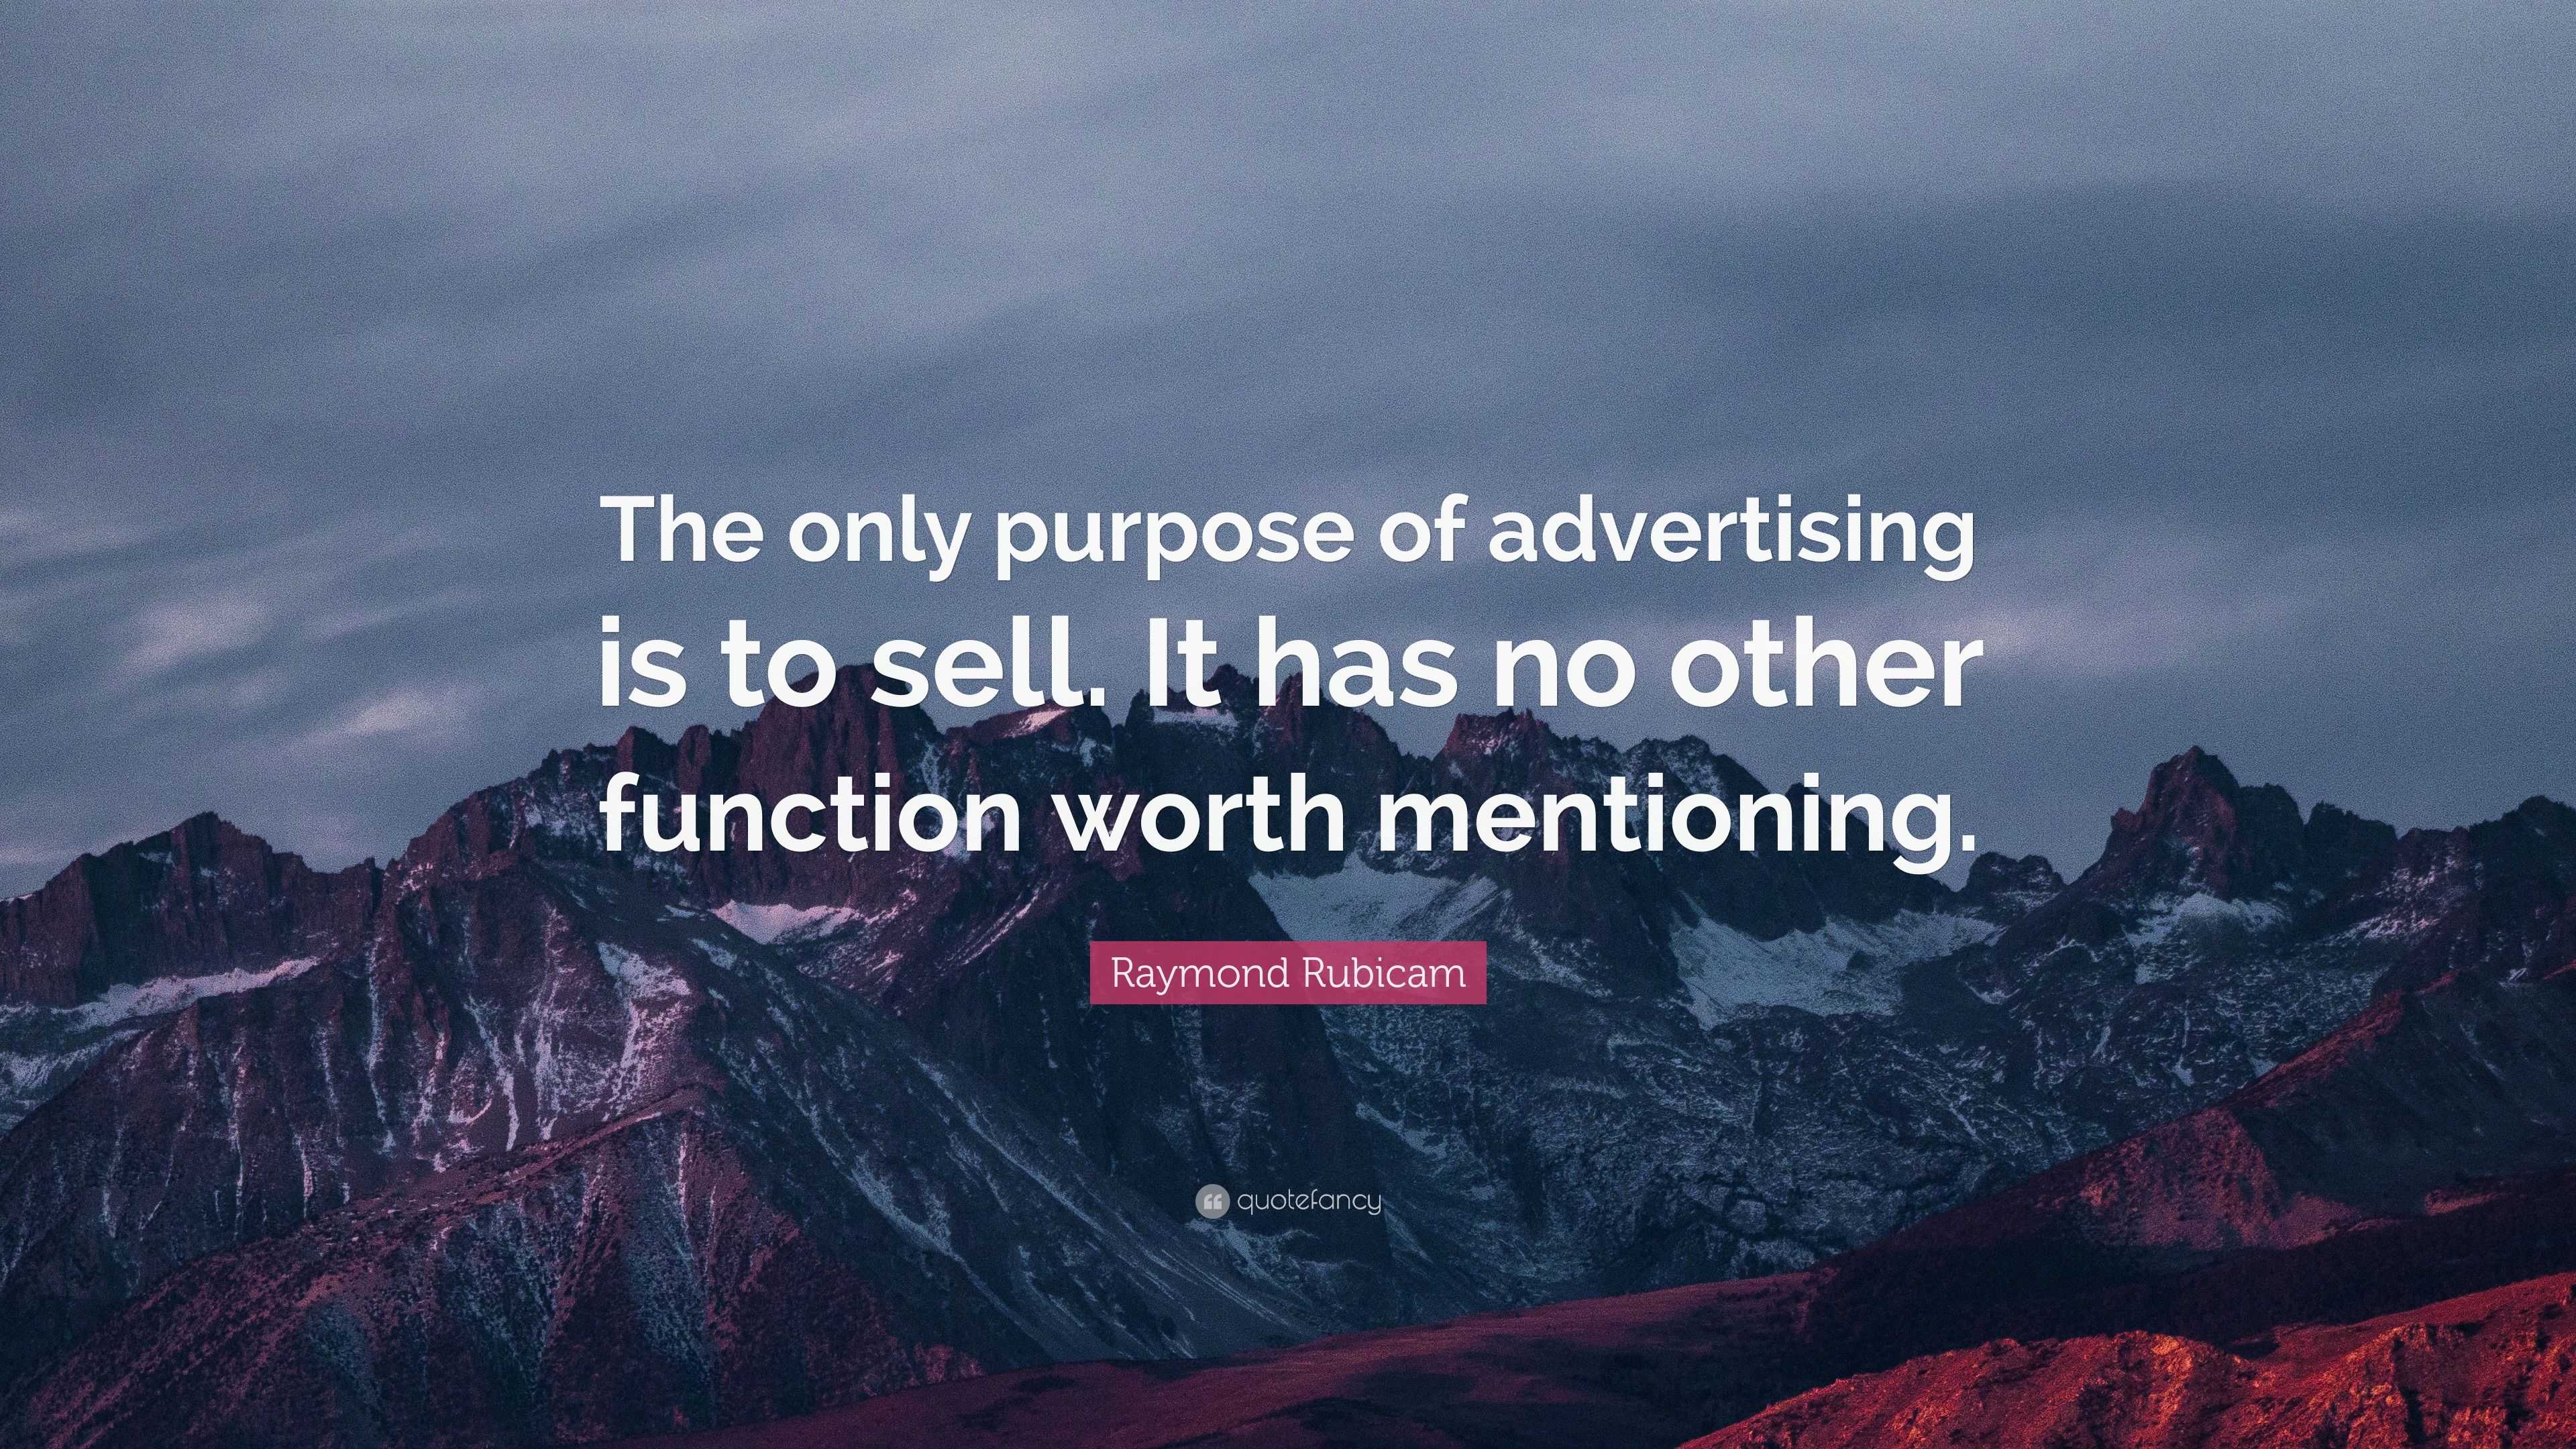 Raymond Rubicam Quote: "The only purpose of advertising is ...